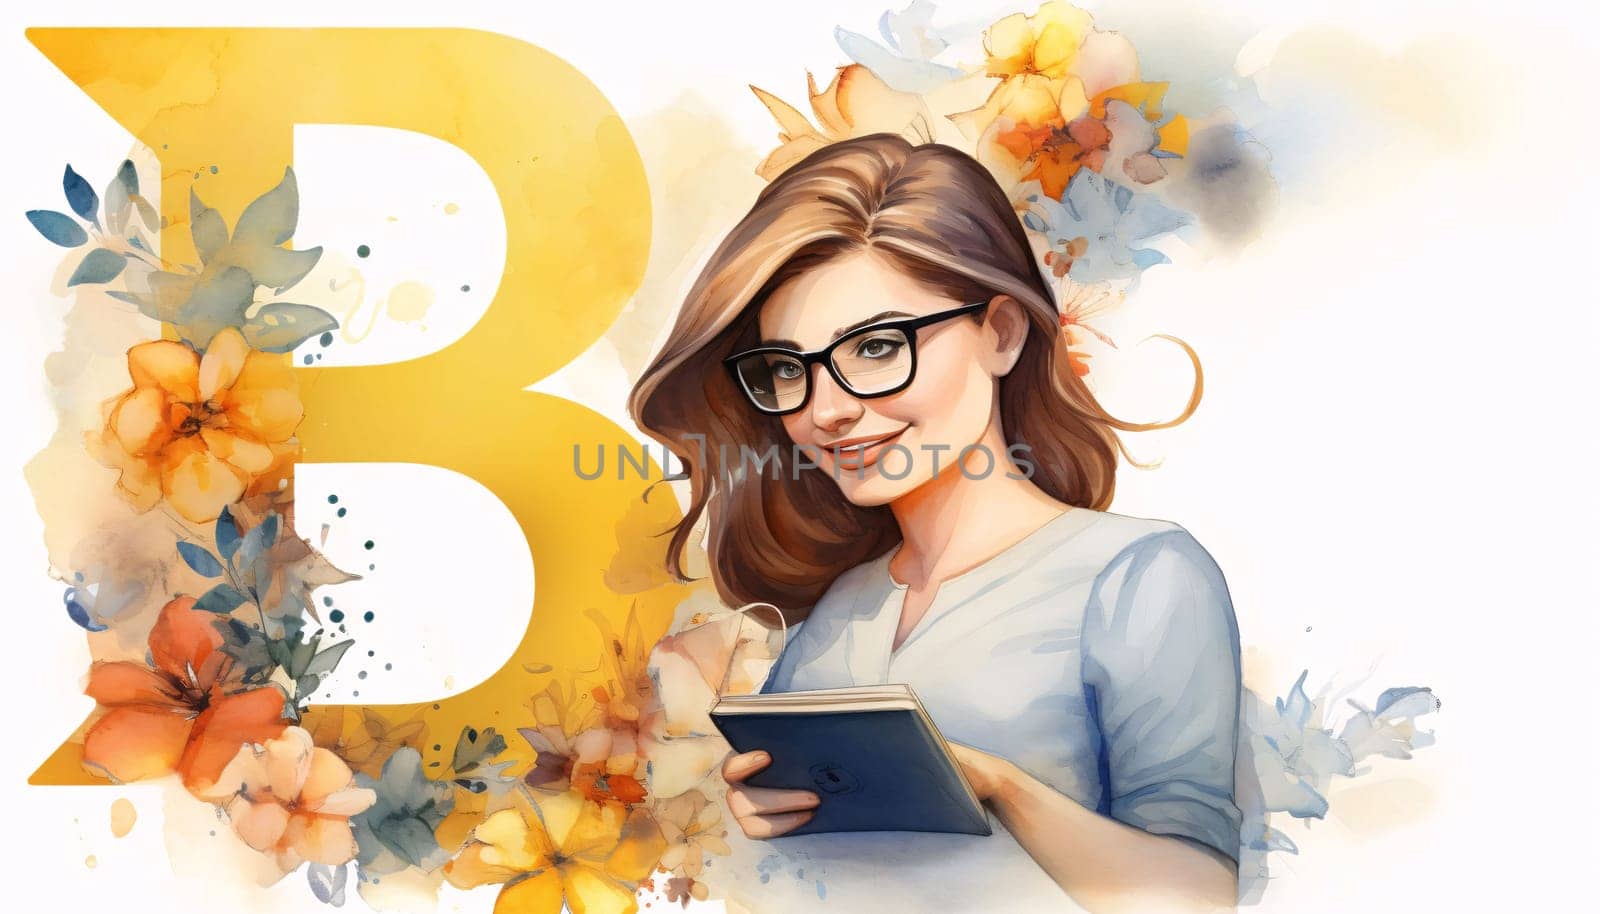 Graphic alphabet letters: Beautiful girl in glasses with a book in her hands. Digital painting.